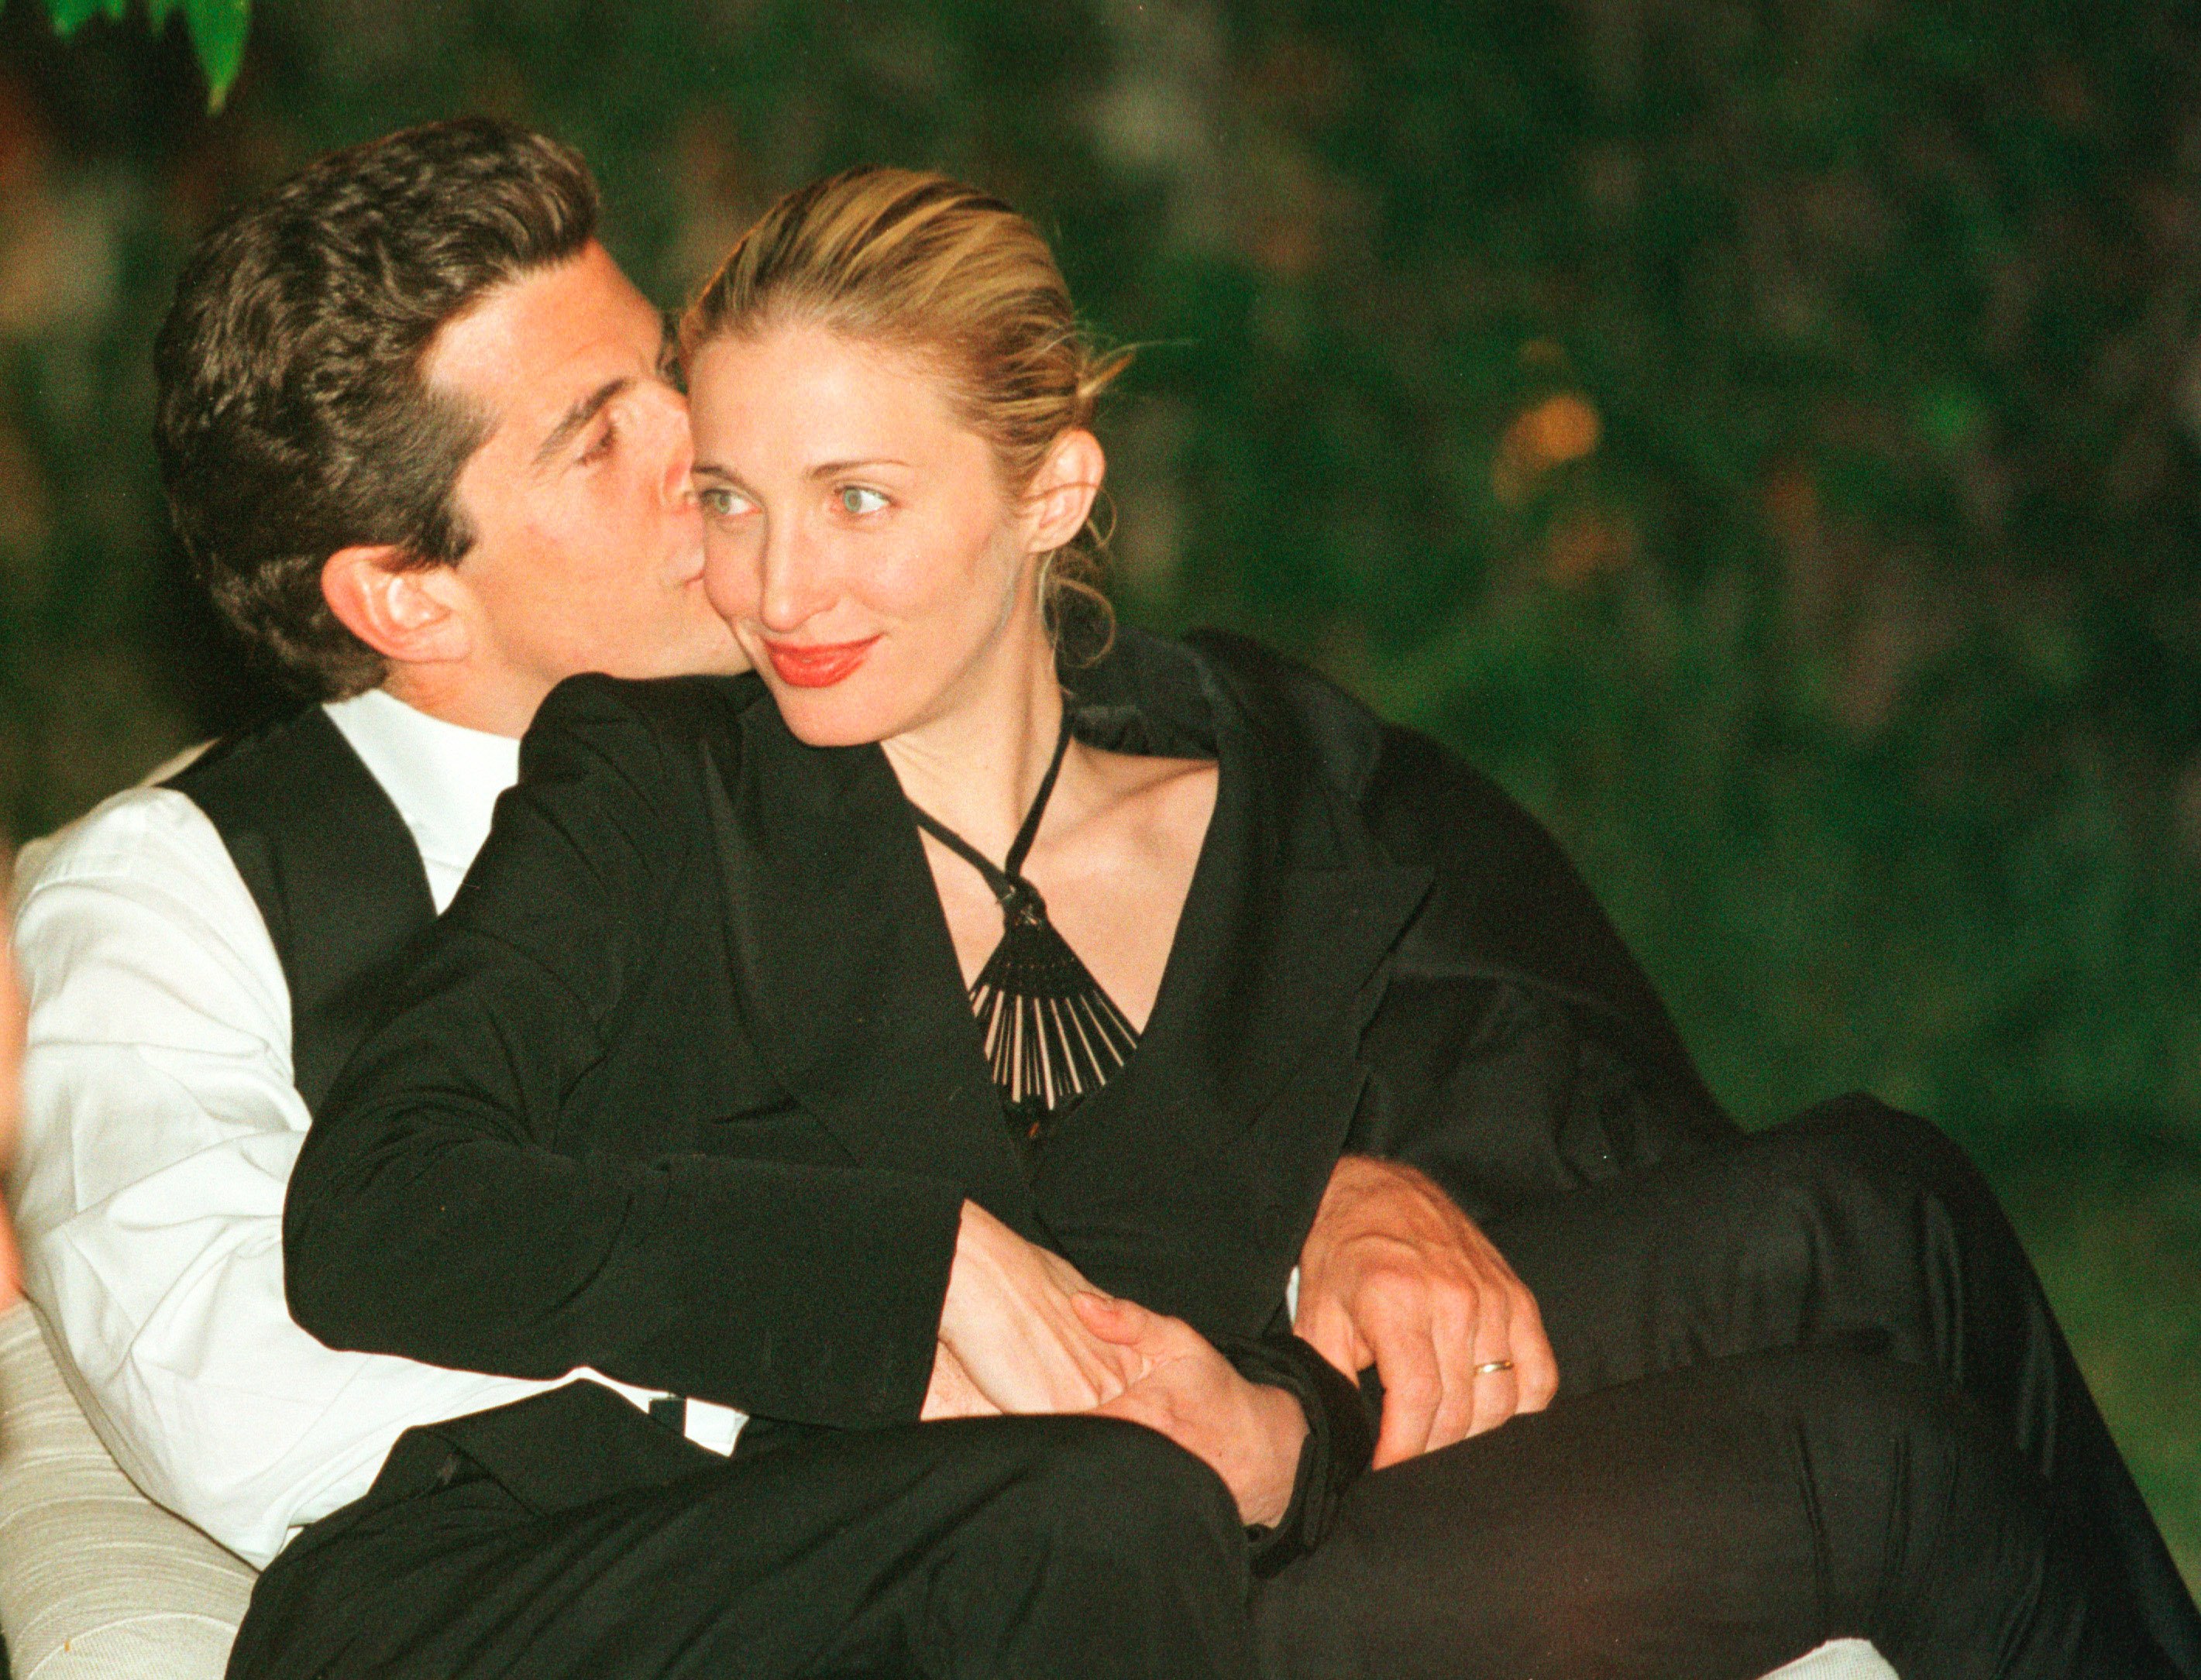 John F. Kennedy, Jr. photographed giving his wife Carolyn a kiss on the cheek during the annual White House Correspondents dinner on May 1, 1999 in Washington, D.C. / Source: Getty Images